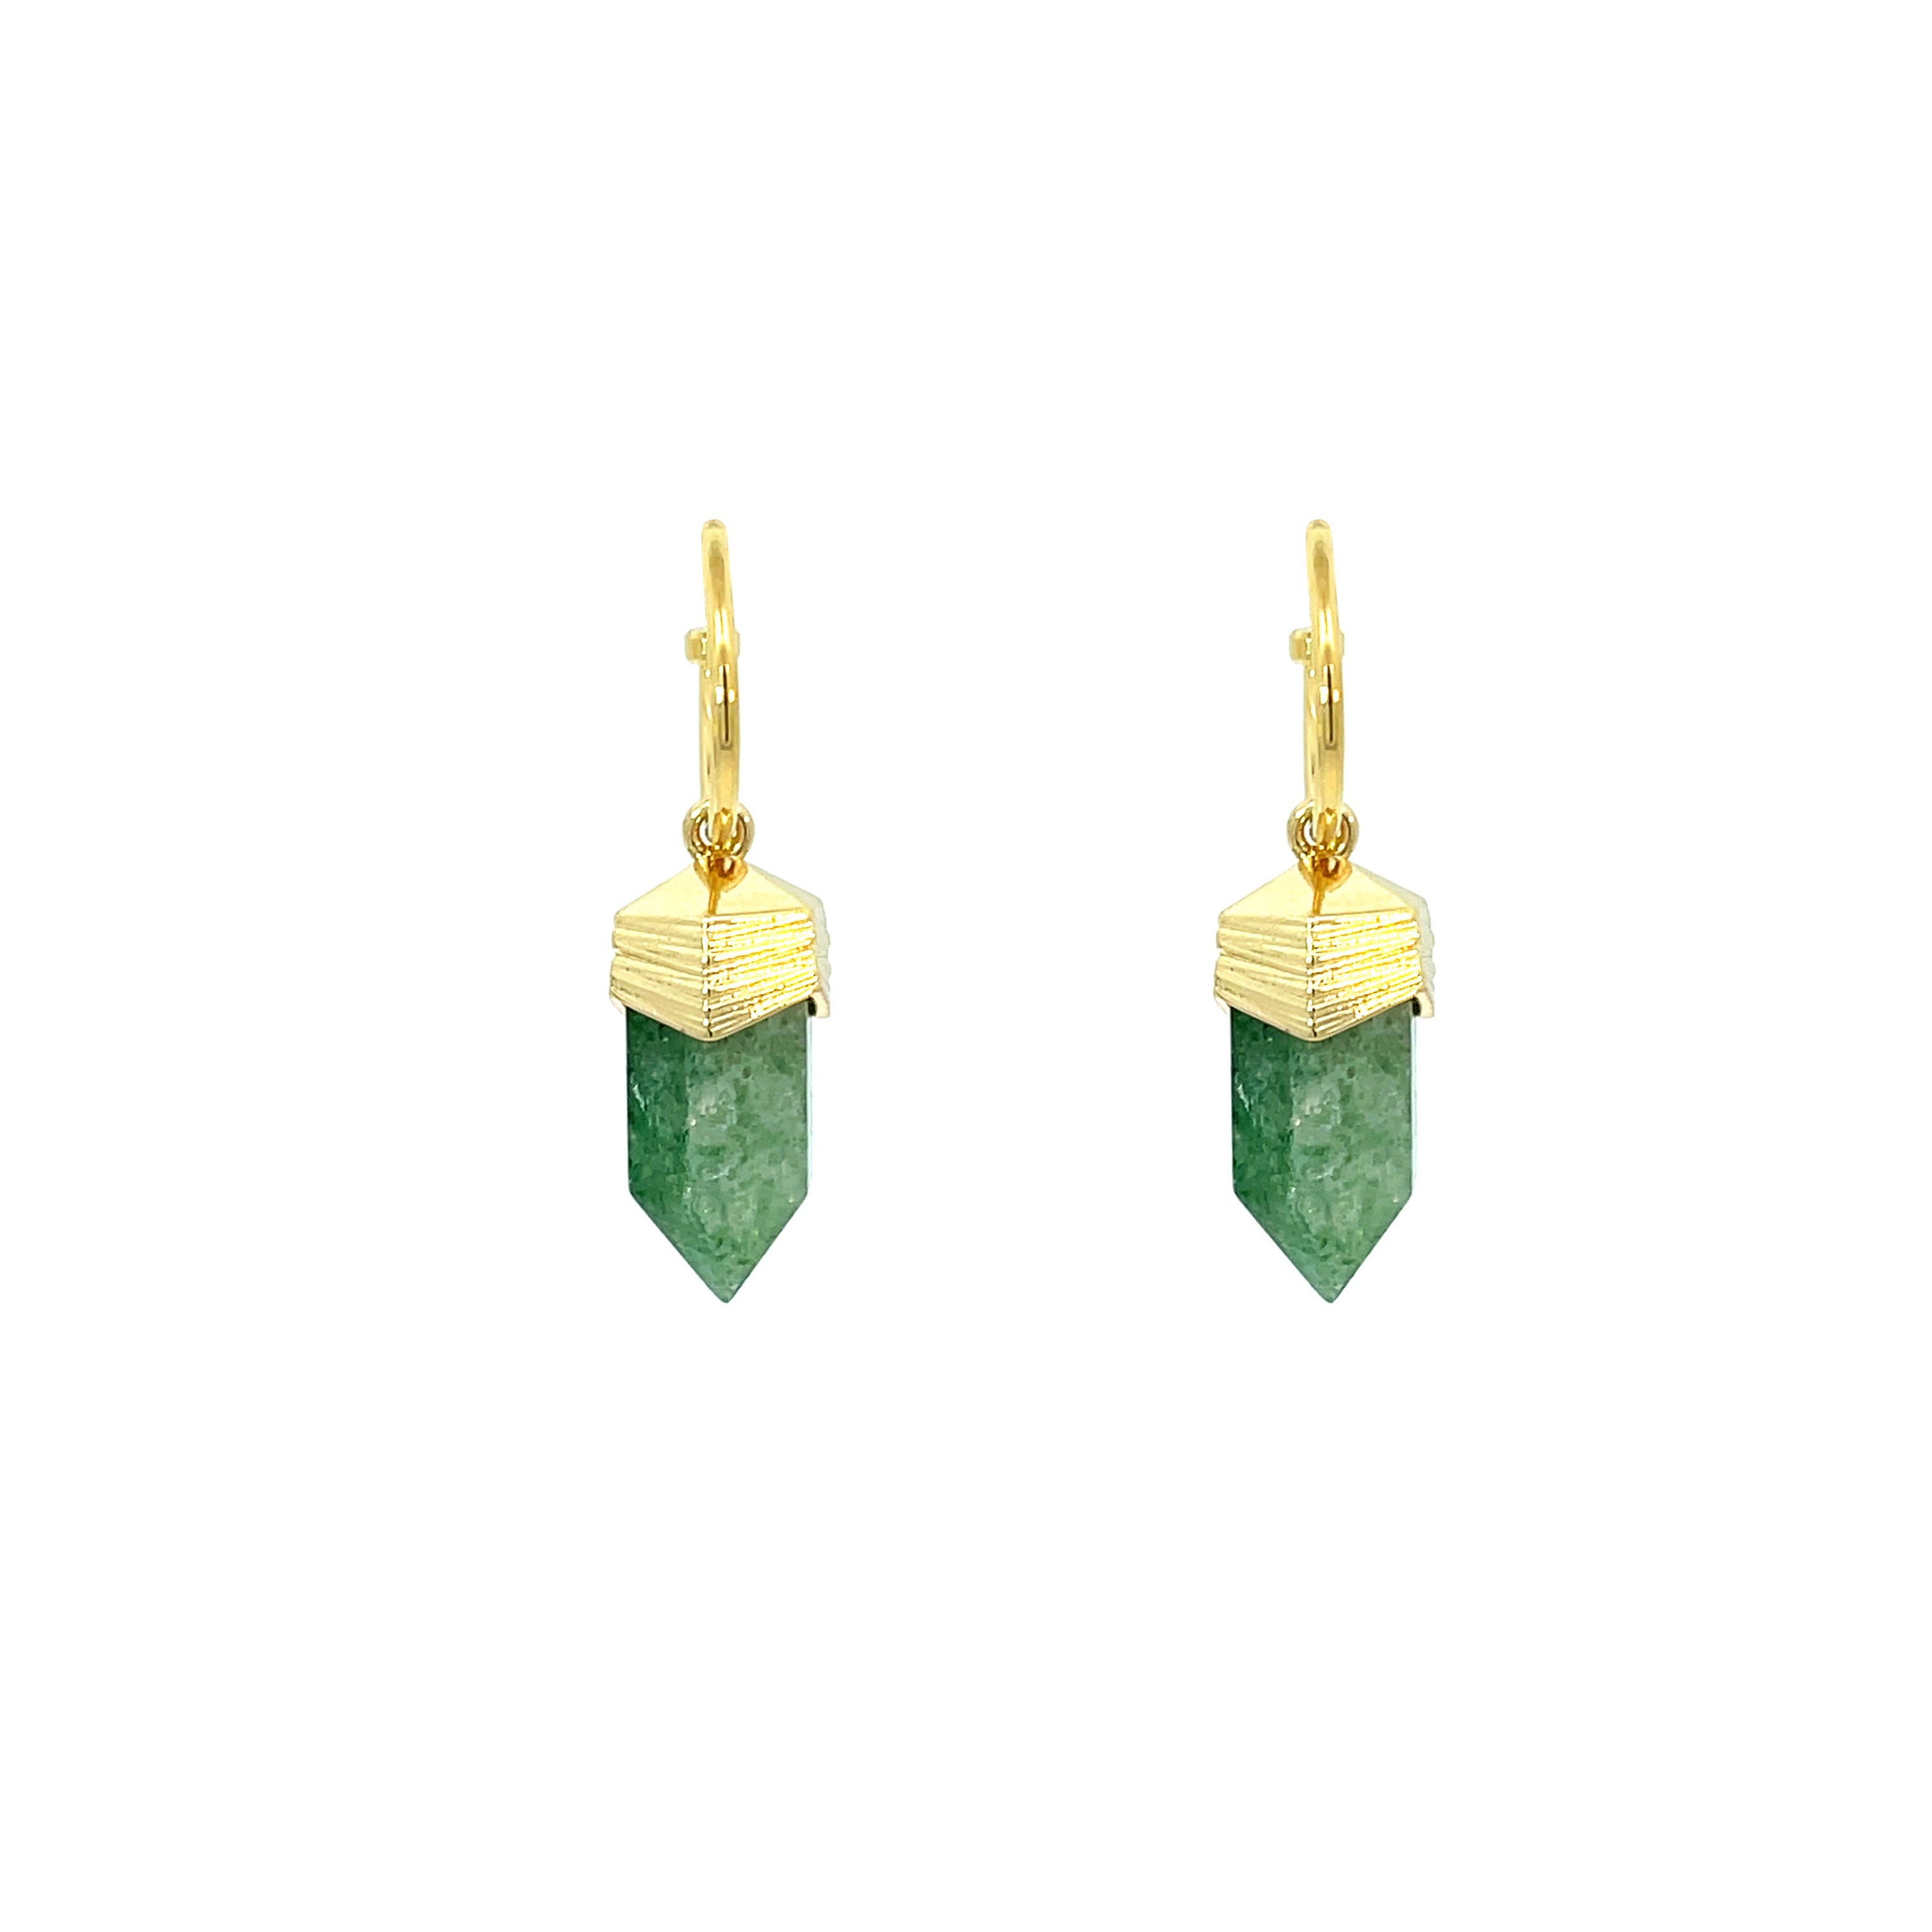 Discover Green Moss Agate Hex Earrings by Amari